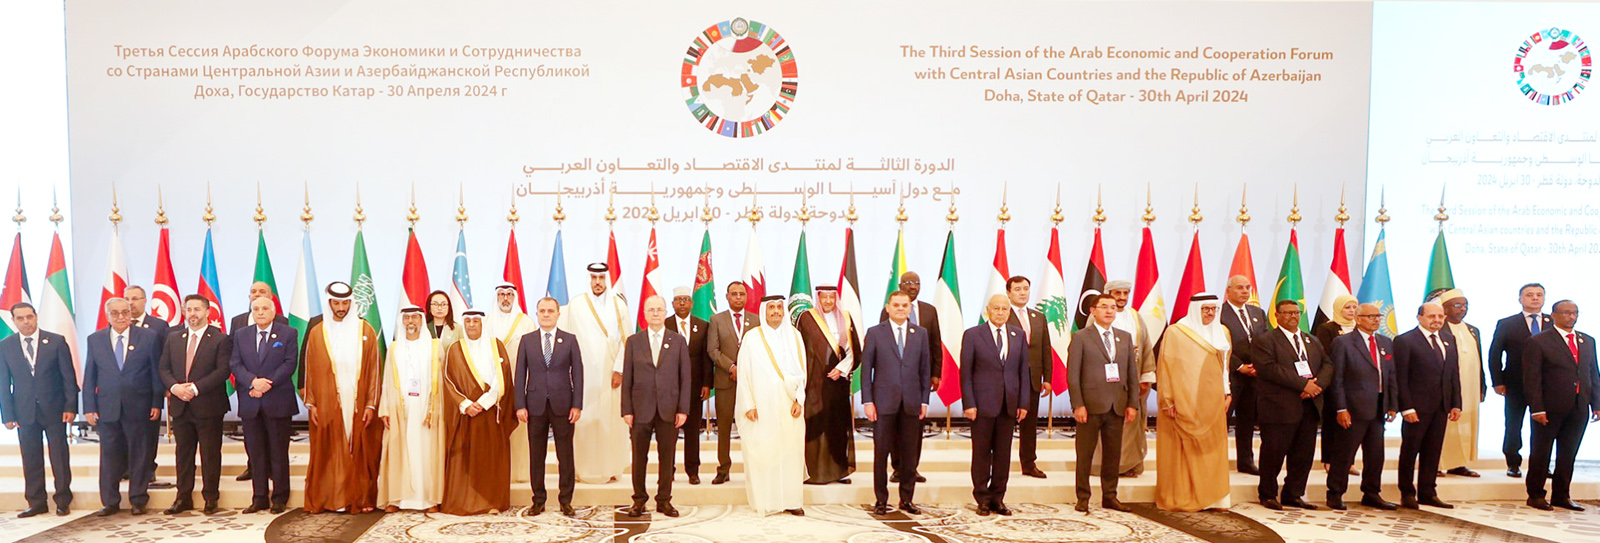 Pan-Arab, Central Asia economic forum opens in Doha to push ties